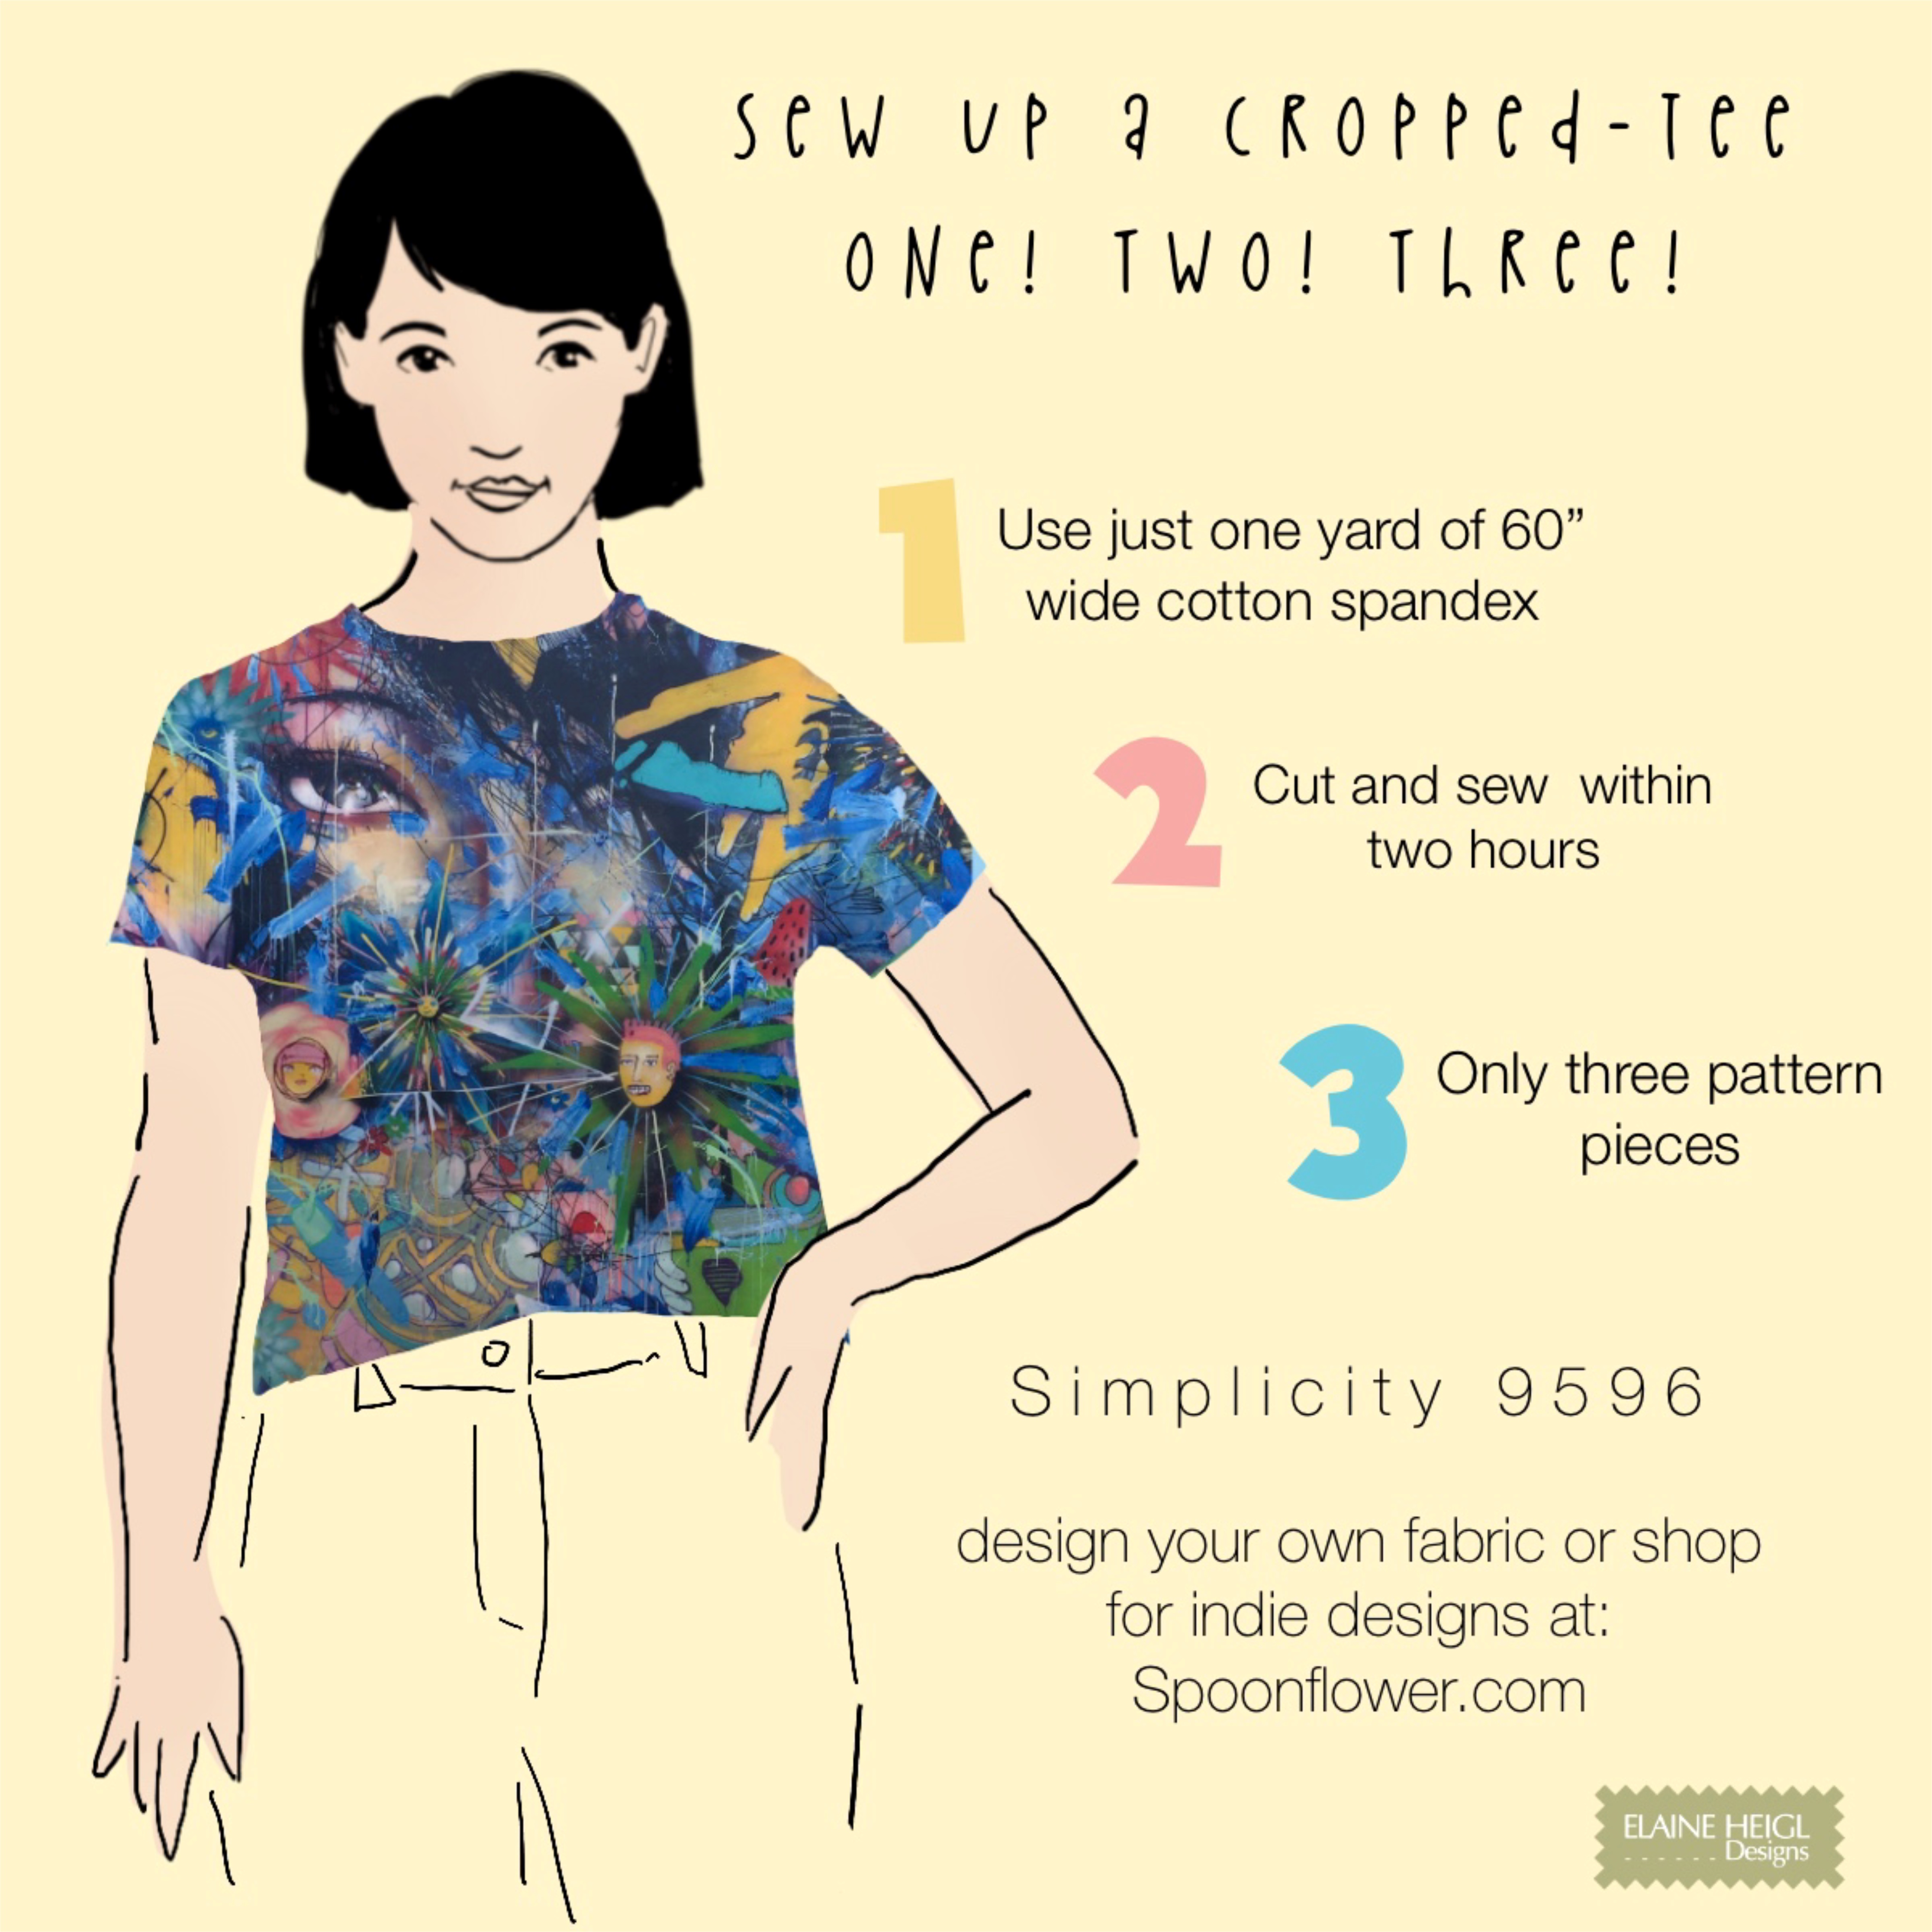 A cute crop tee to style and sew…Make many!